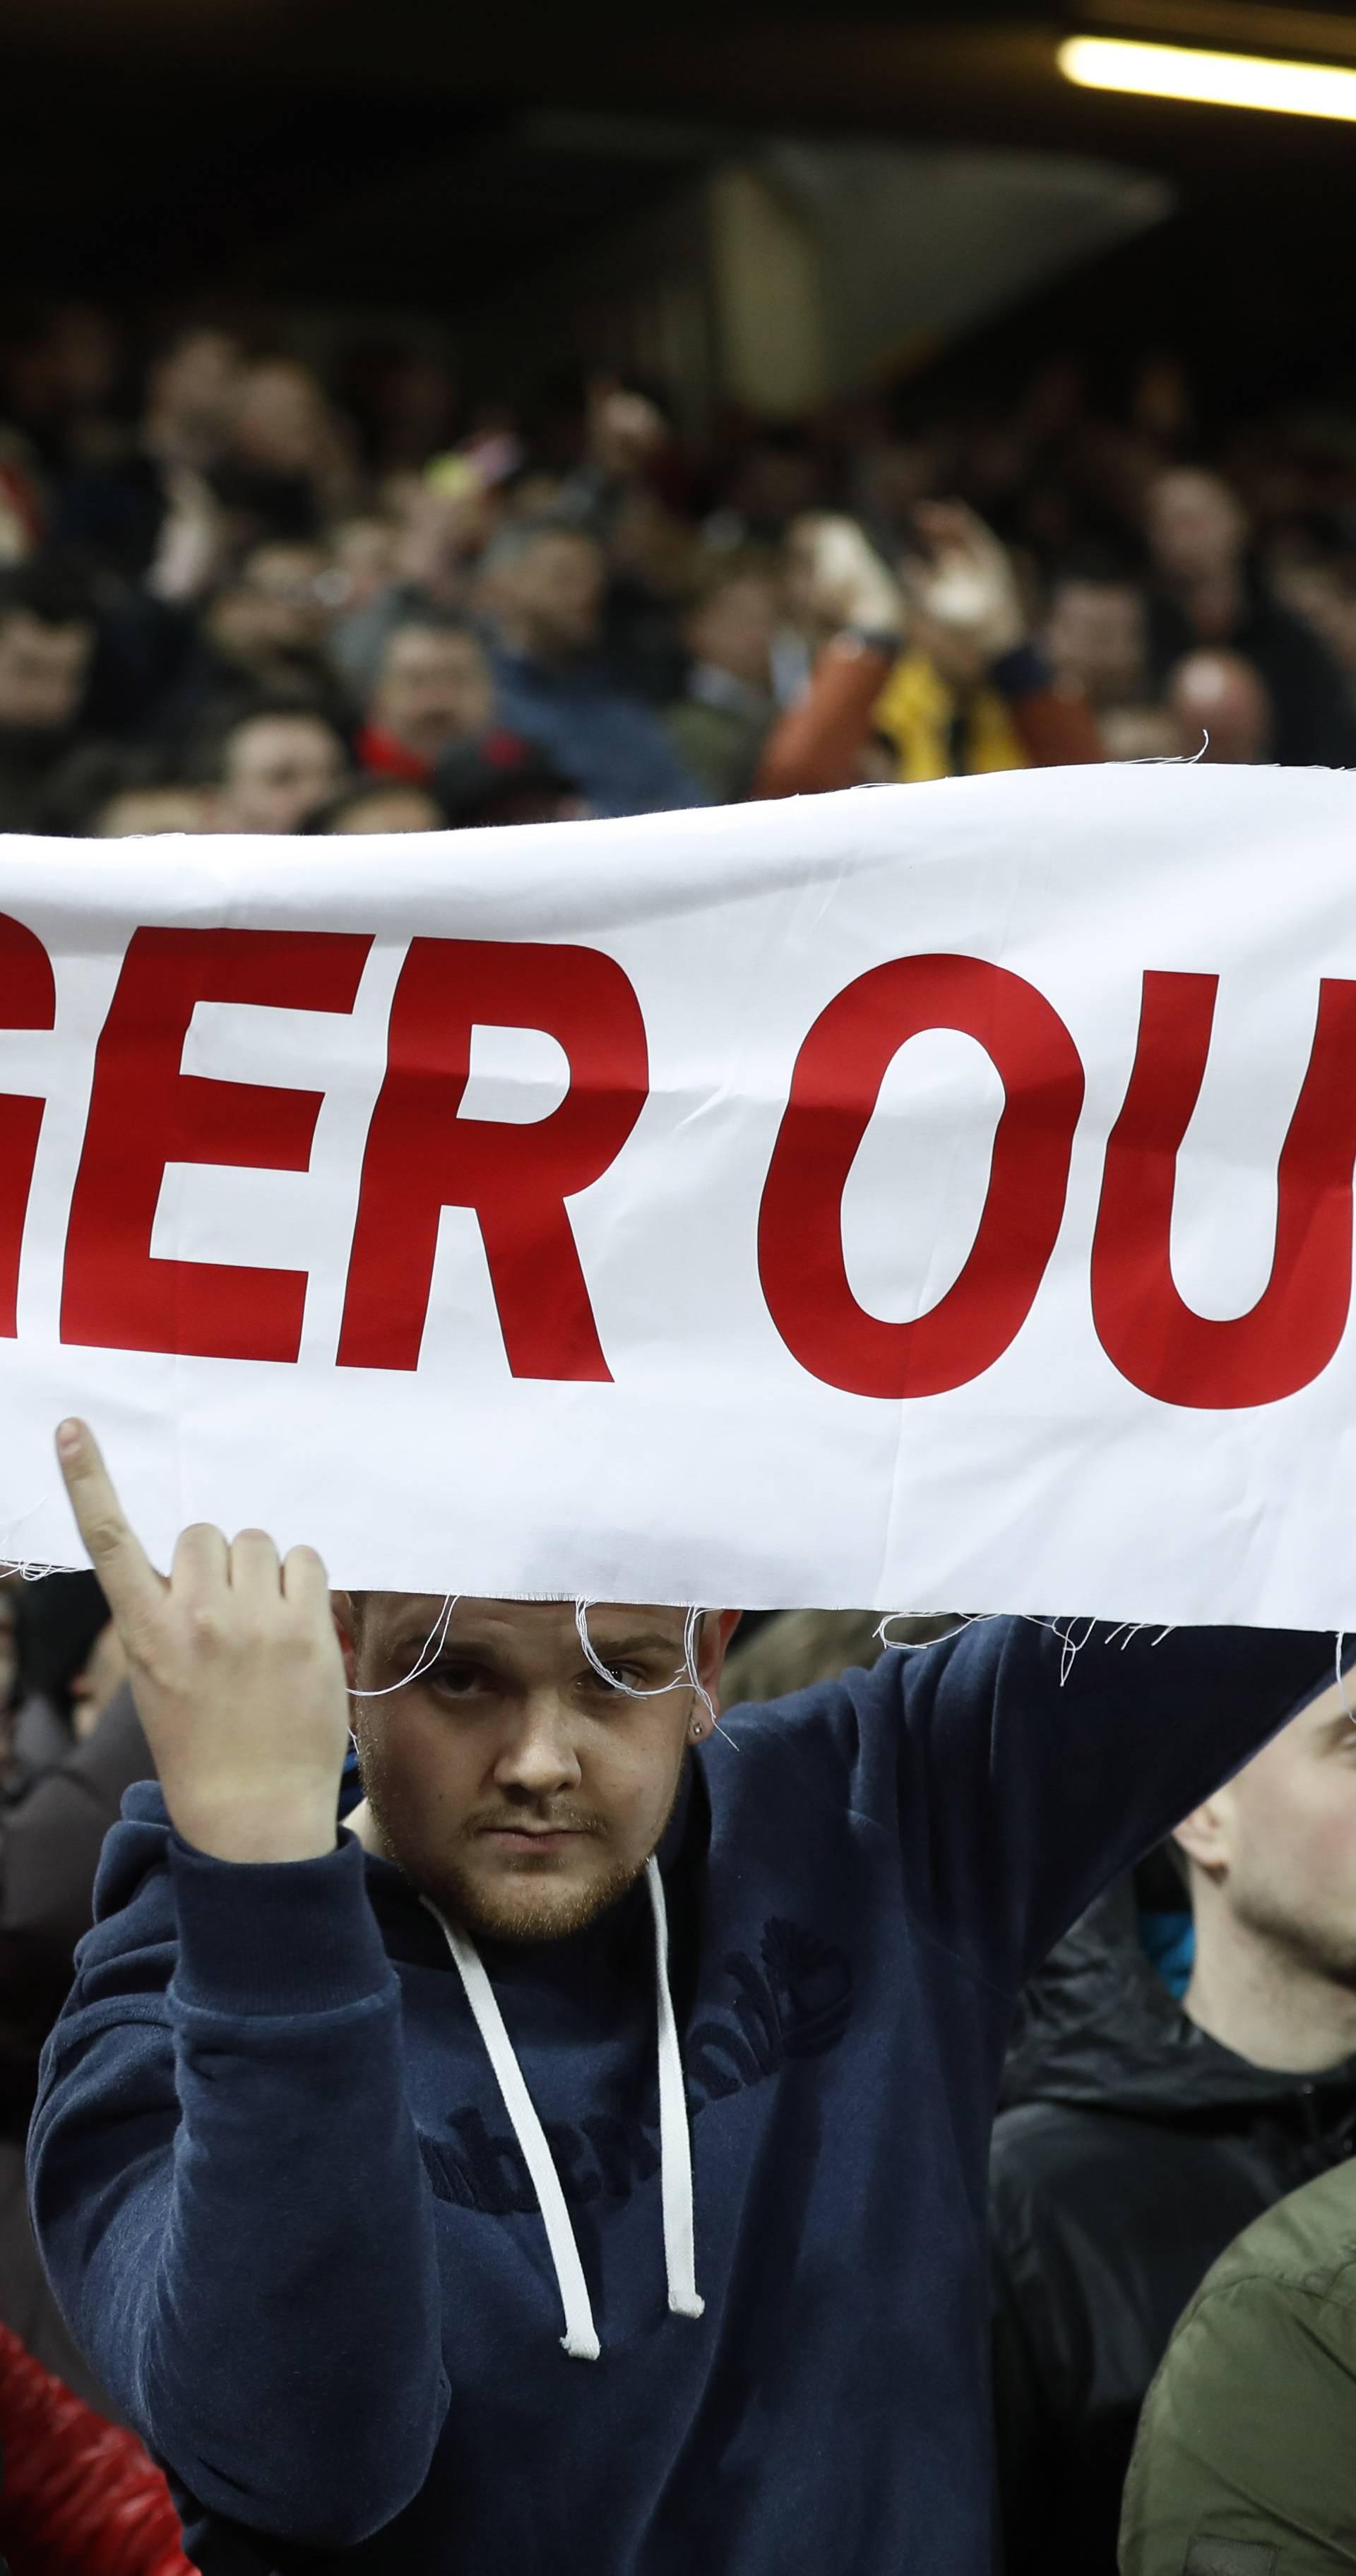 Arsenal fans protest with a banner against Arsenal manager Arsene Wenger